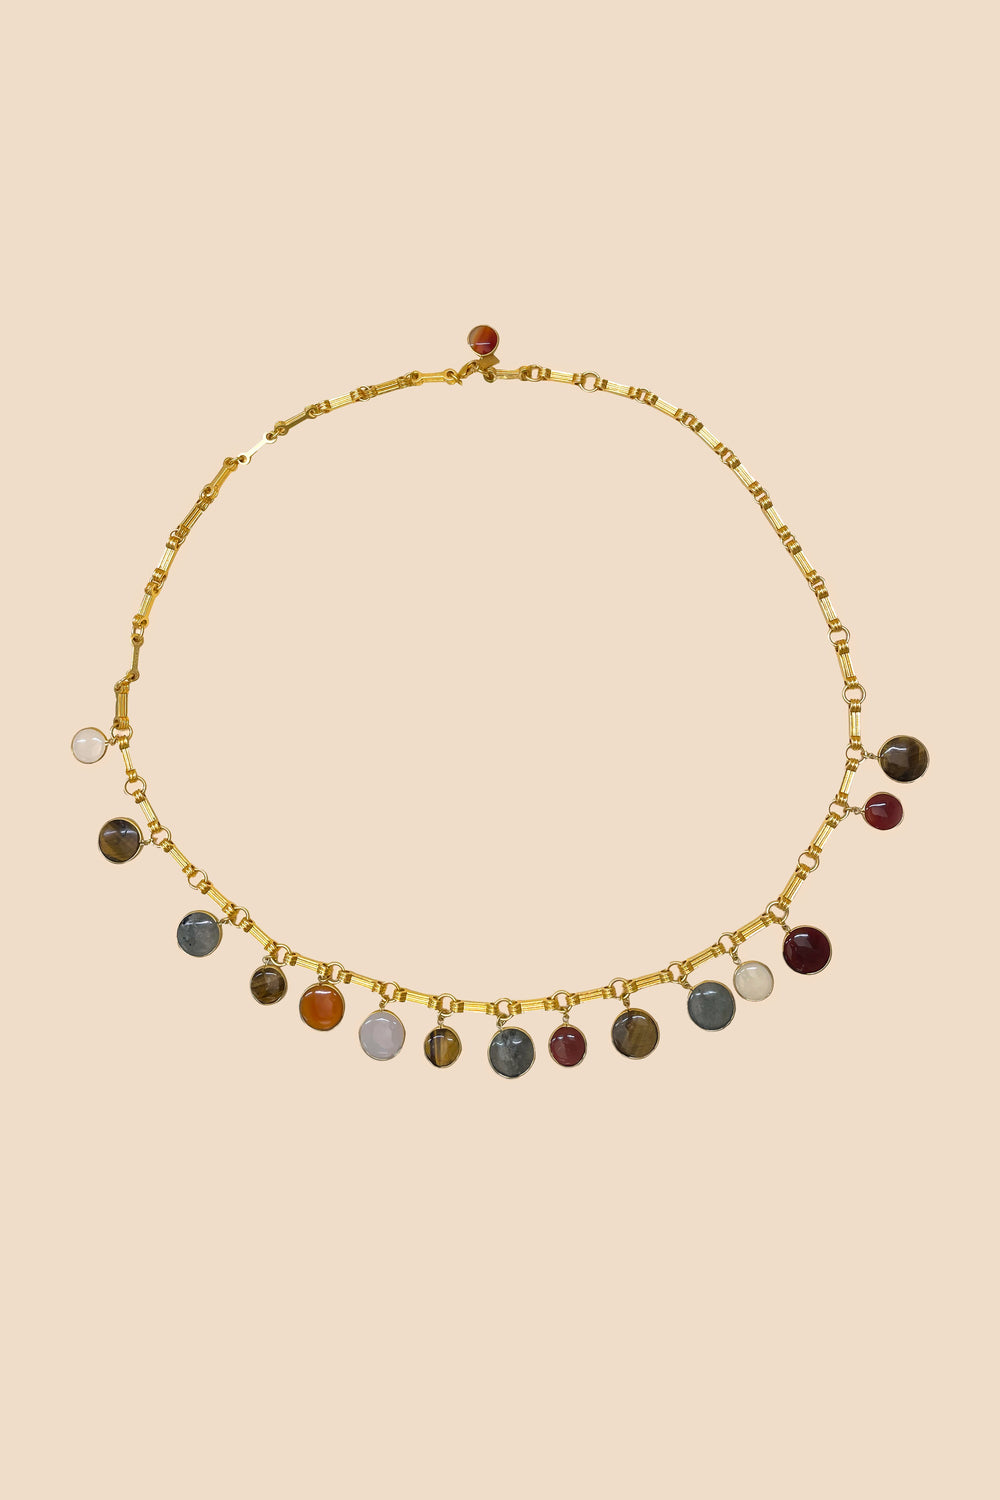 Rixo Isolde is a chain belt adorned with 18-carat gold plating in an antique shade inspired by vintage. Each coin charm is beset with a real labradorite, agate, or tiger-eye stone that flatters any outfit but best complements your favourite RIXO pieces. 